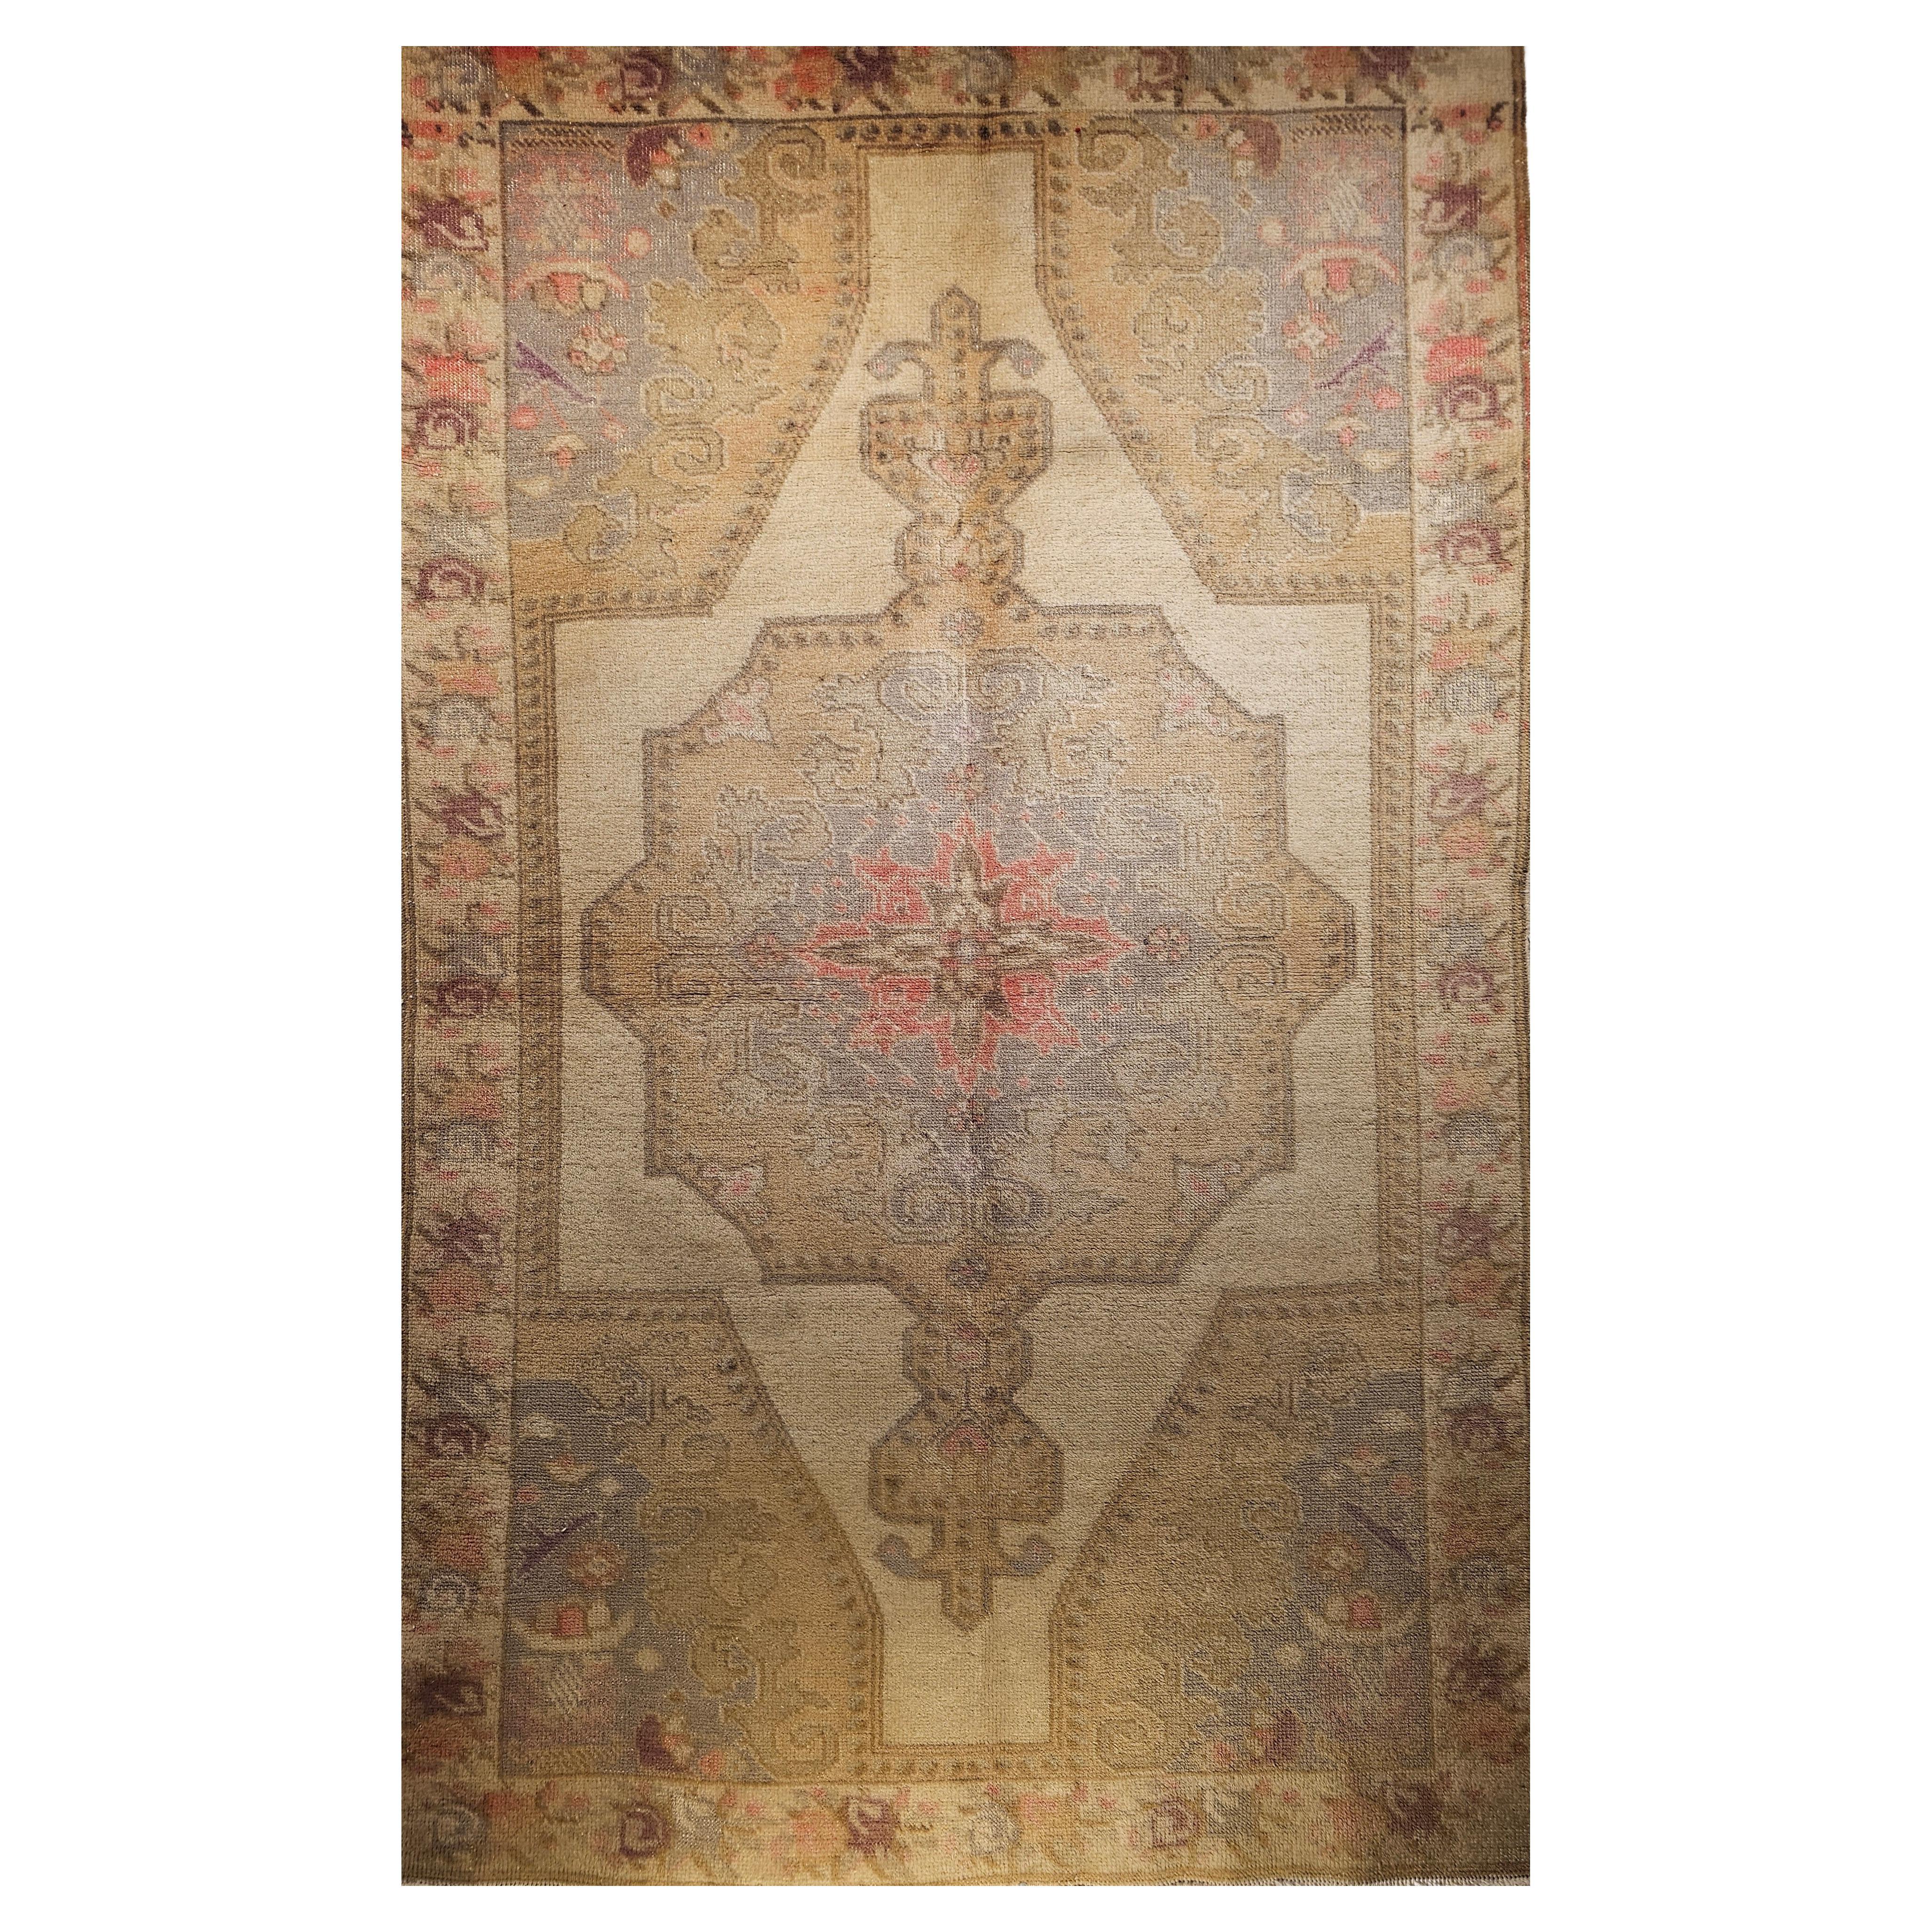  A vintage Turkish Oushak area rug with soft colors including pale yellow, pink, purple, and green from the early 1900s.  The rug has a beautiful open field design with an abrash pale yellow, purple, green and pink colors.  The corner spandrels are